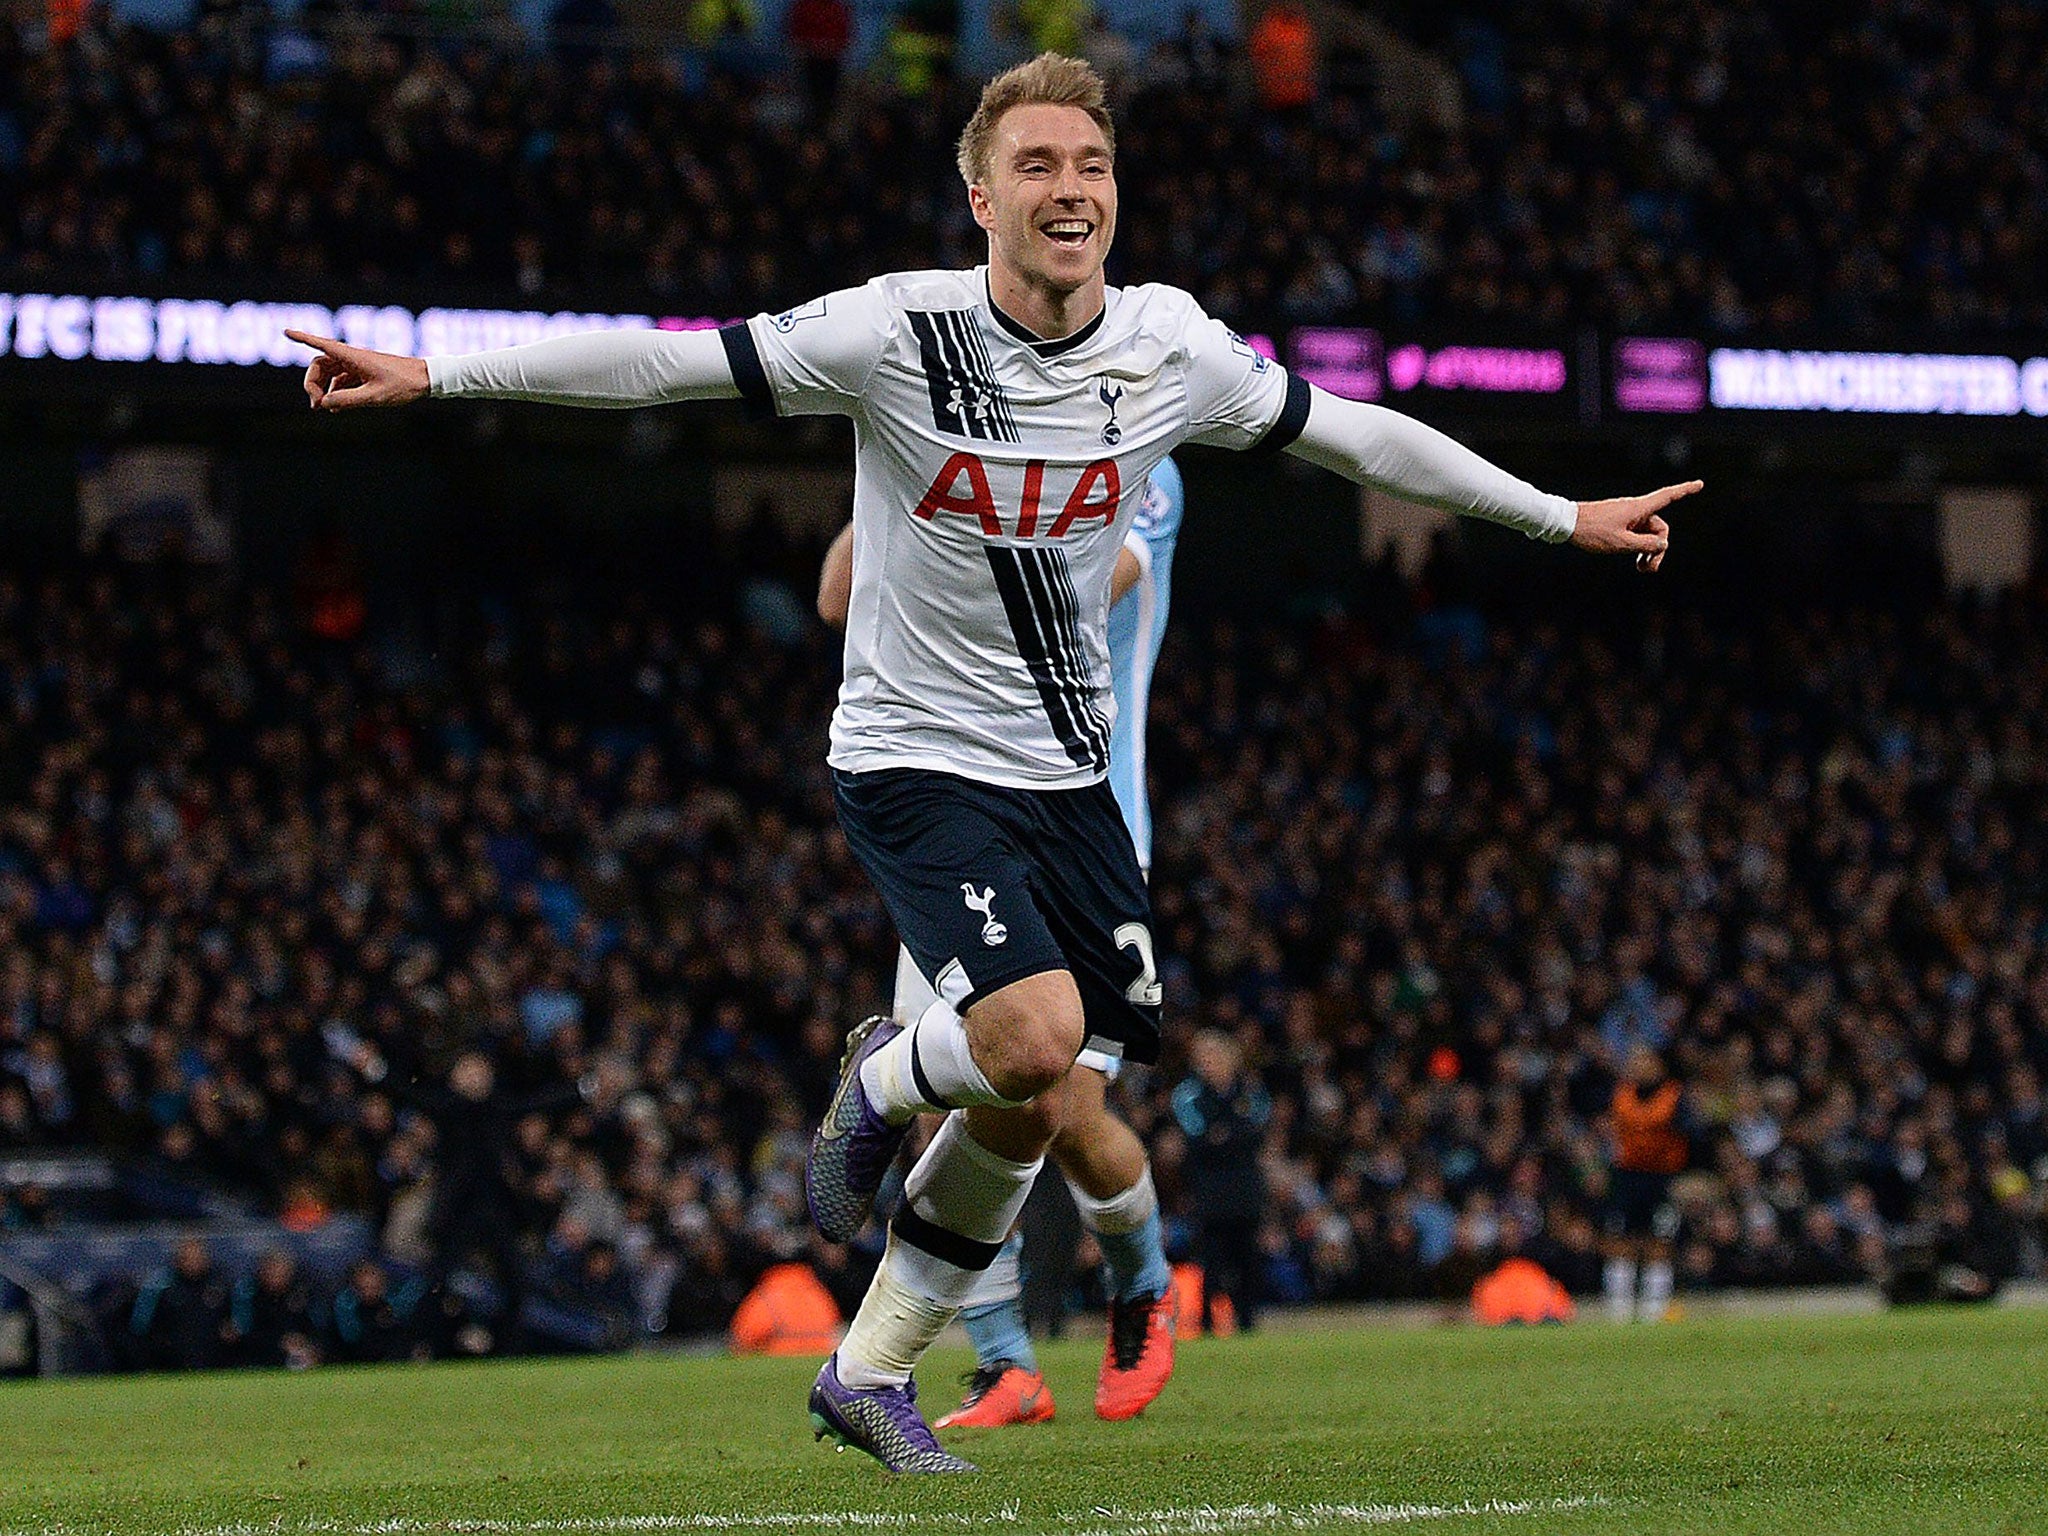 Christian Eriksen is set to sign a new long-term contract at Tottenham